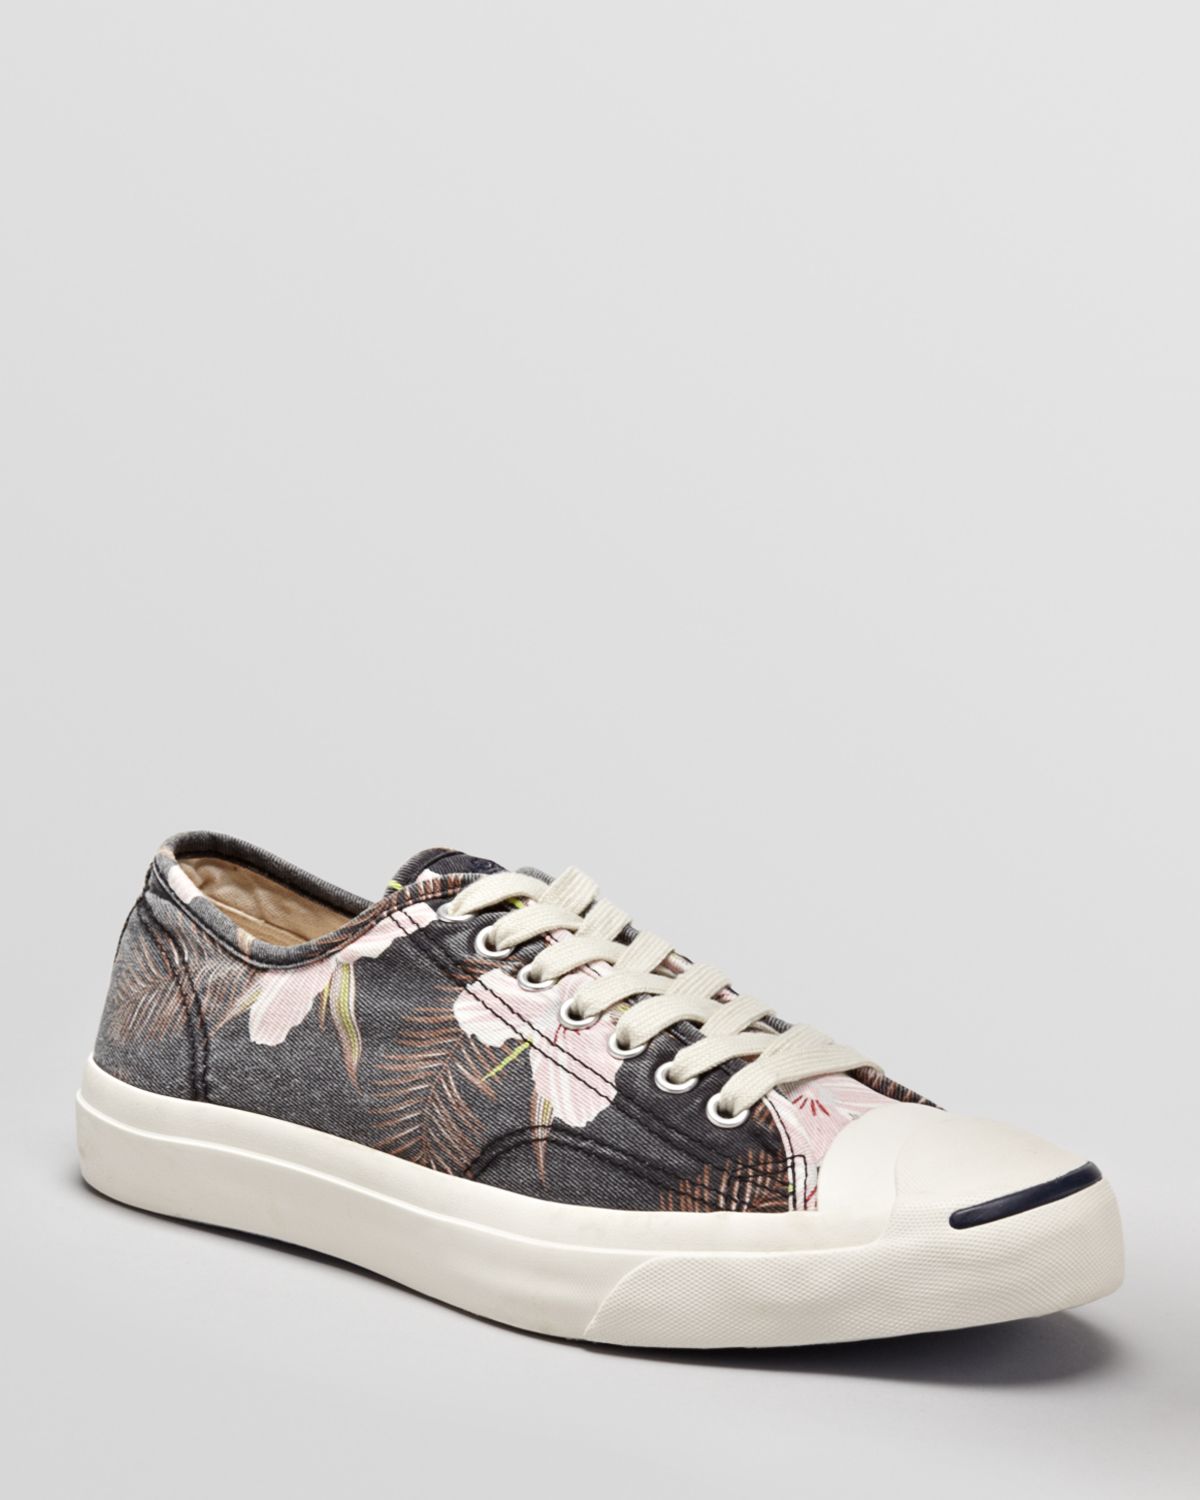 converse jack purcell floral